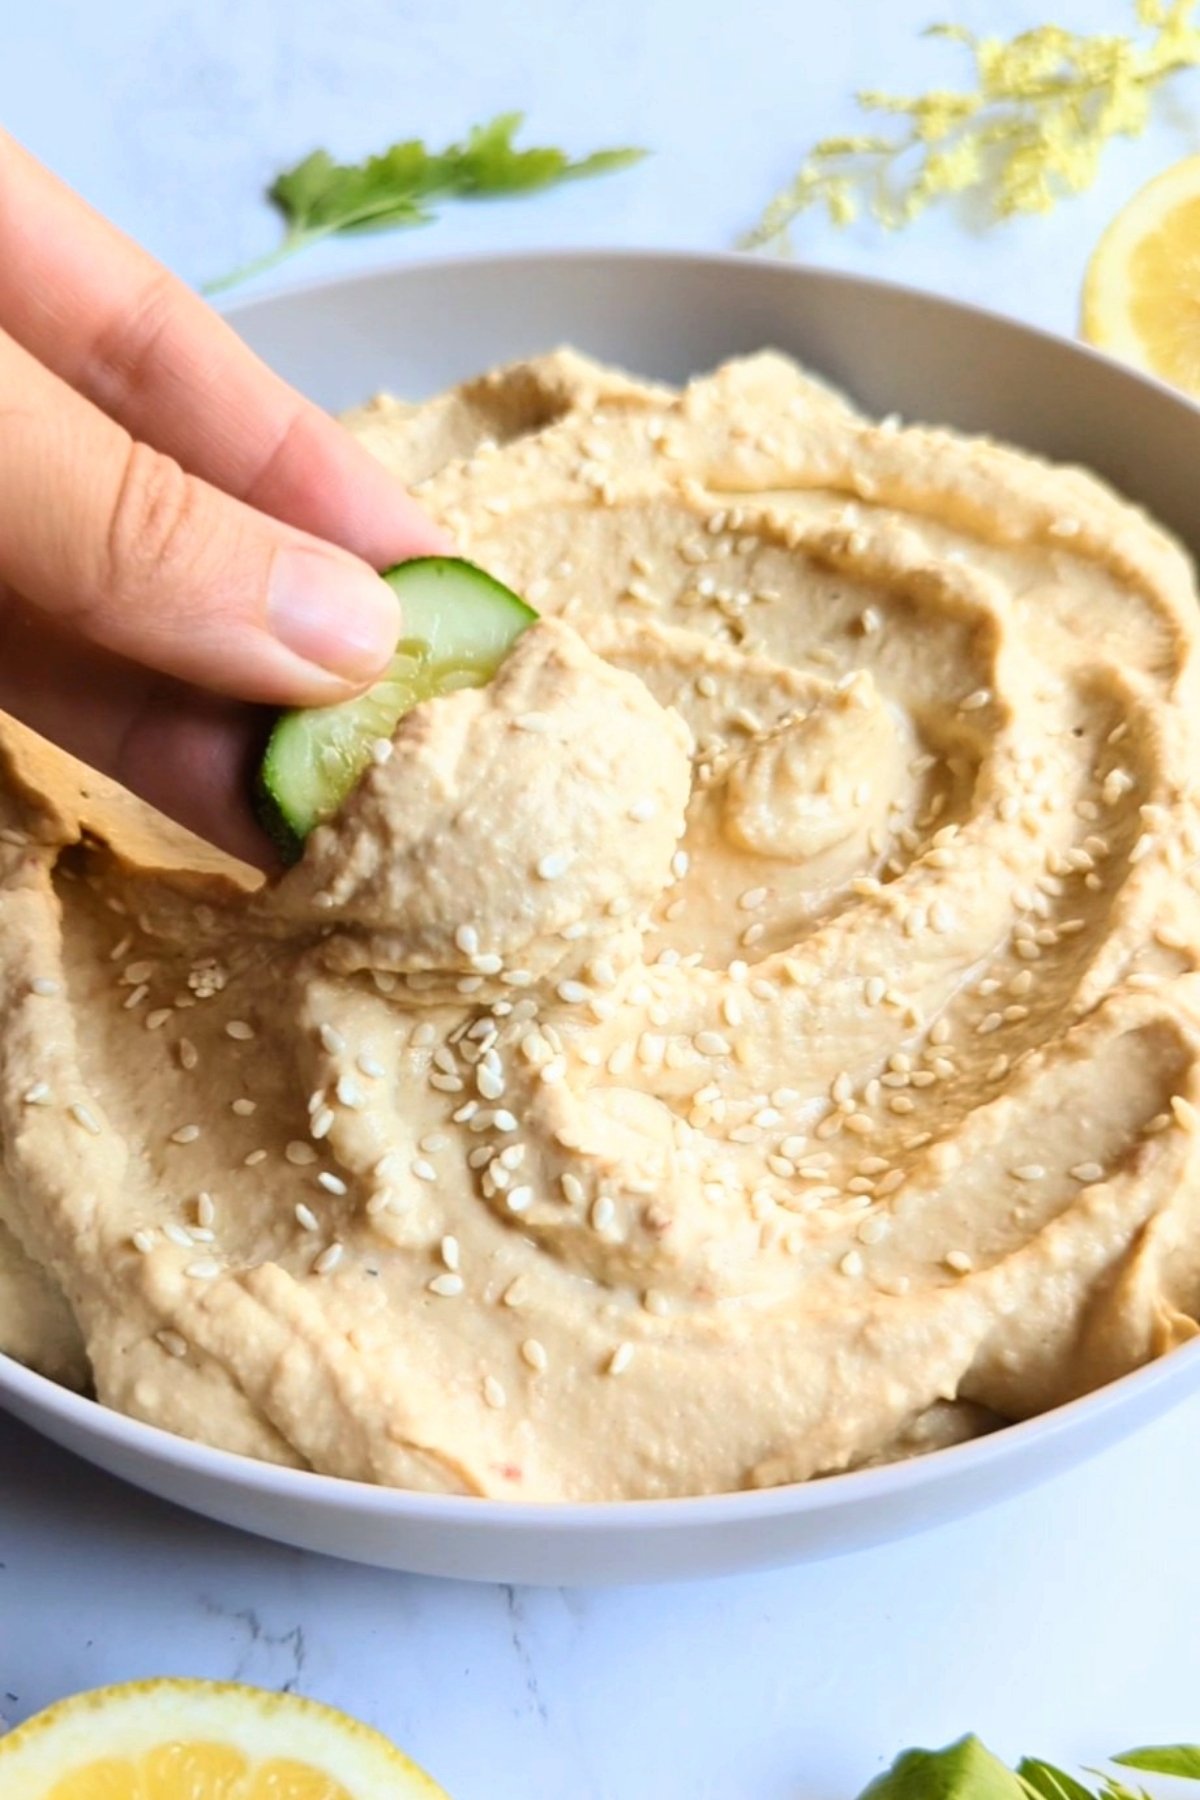 oil free hummus with tahini recipe healthy dip without oil for vegetables pita bread or pretzels